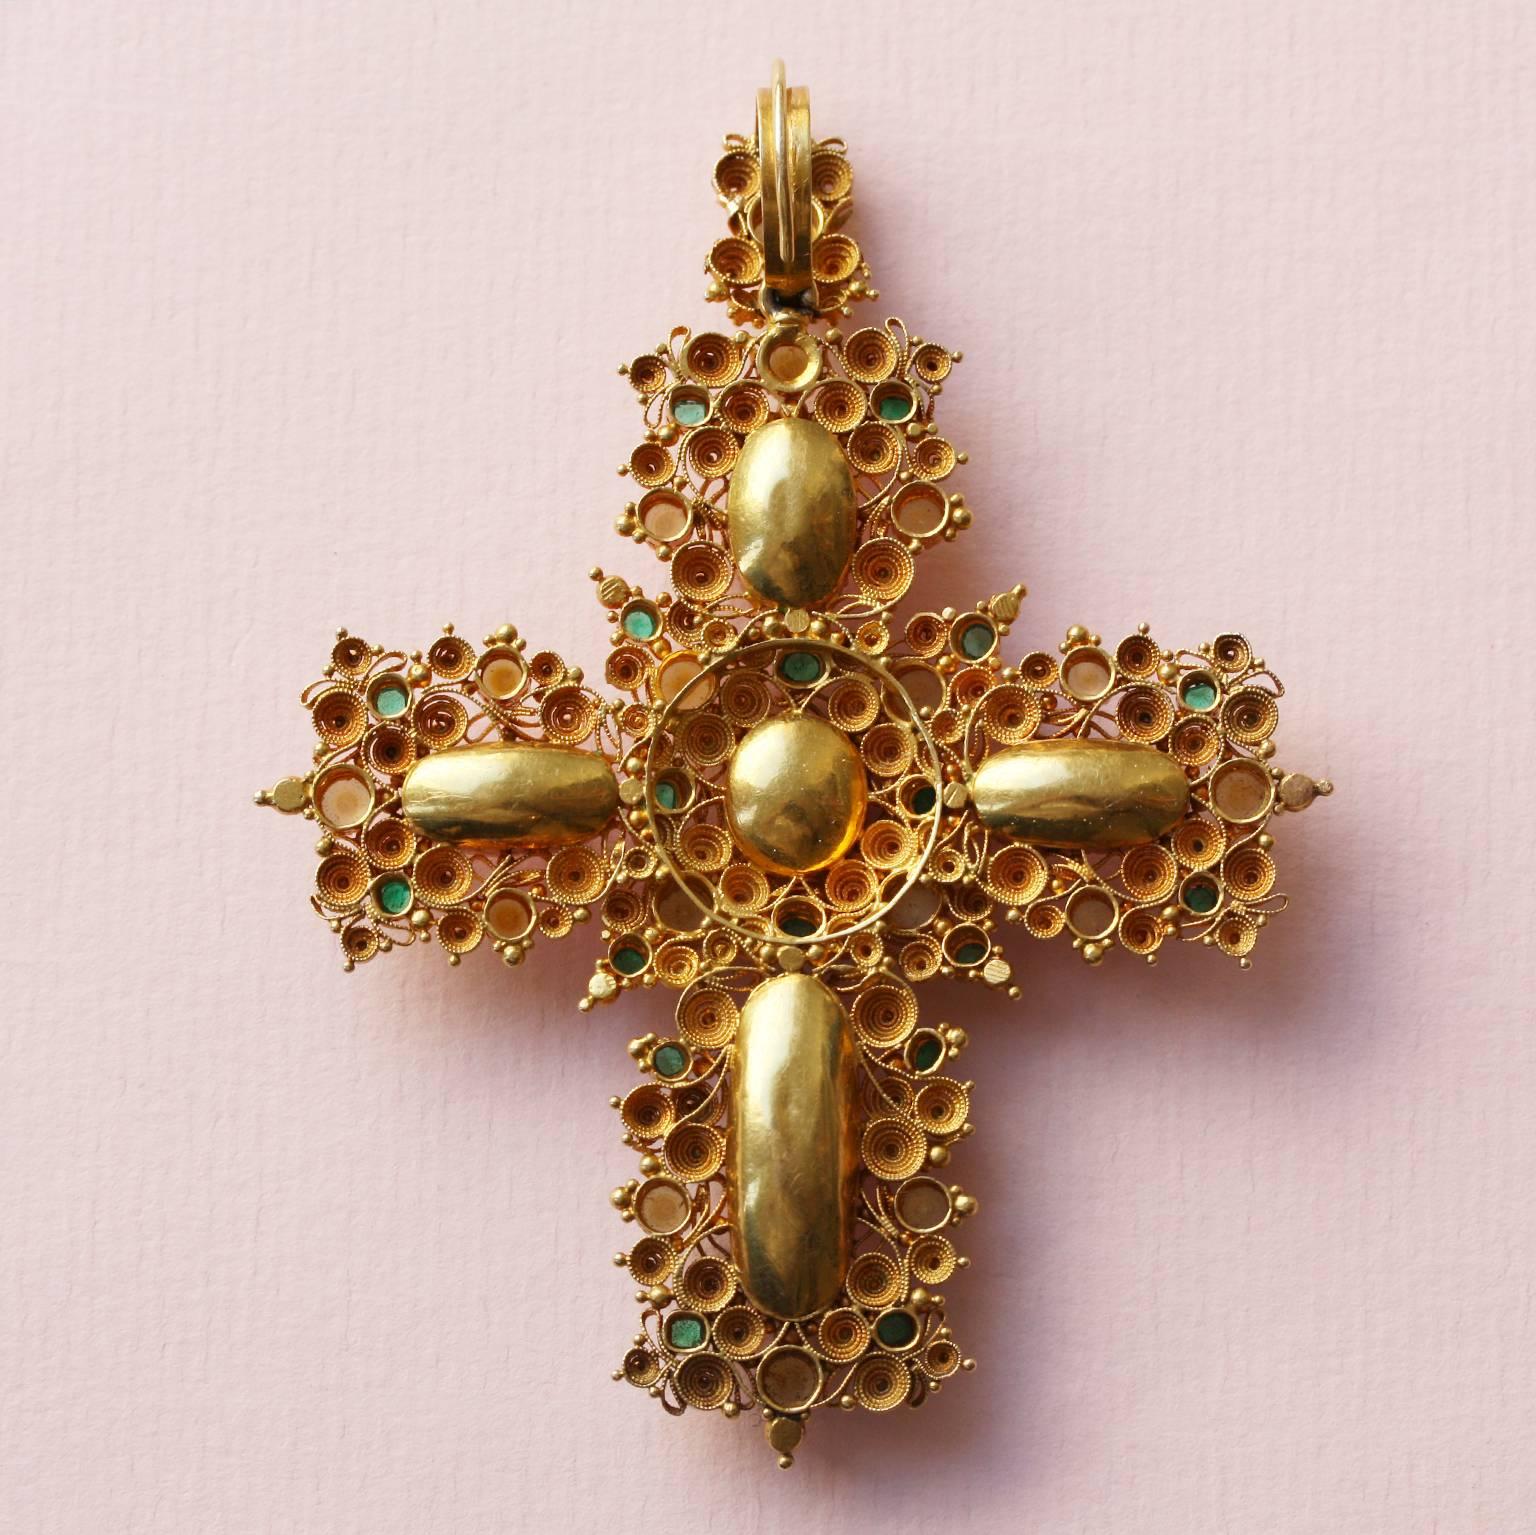 A large 18-carat gold cross set with natural pearls, natural emeralds all in open setting, and five large pink topazes in closed setting. The  highly ornate gold decorations in the cannetille technique, were fashionable in England from 1790-1830.